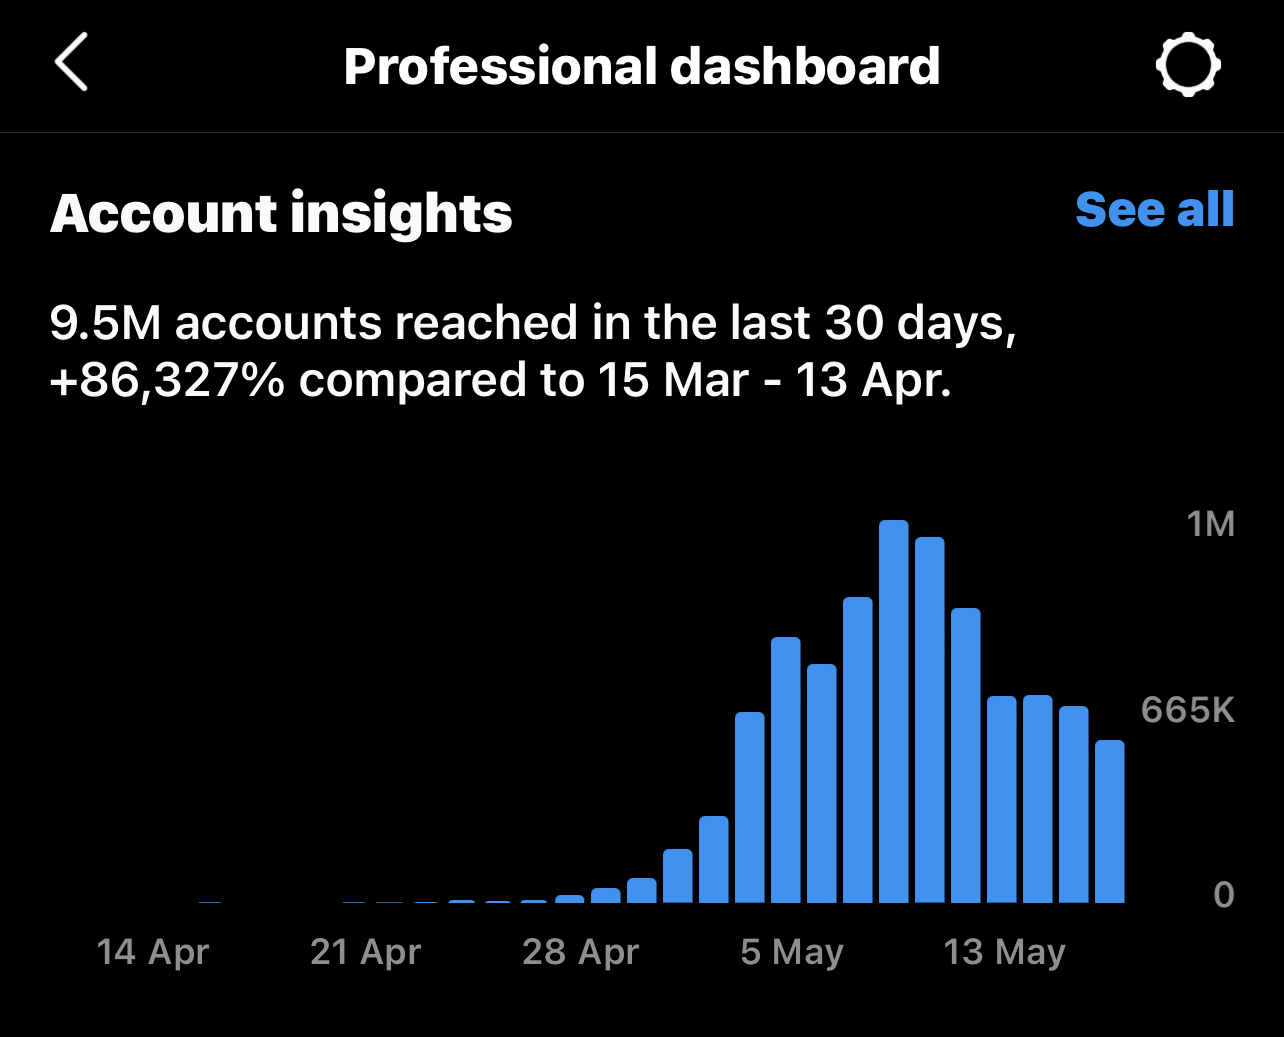 Instagram insights for @thecopywriters day viral video post showing an 86,327% increase in reach in 30 days